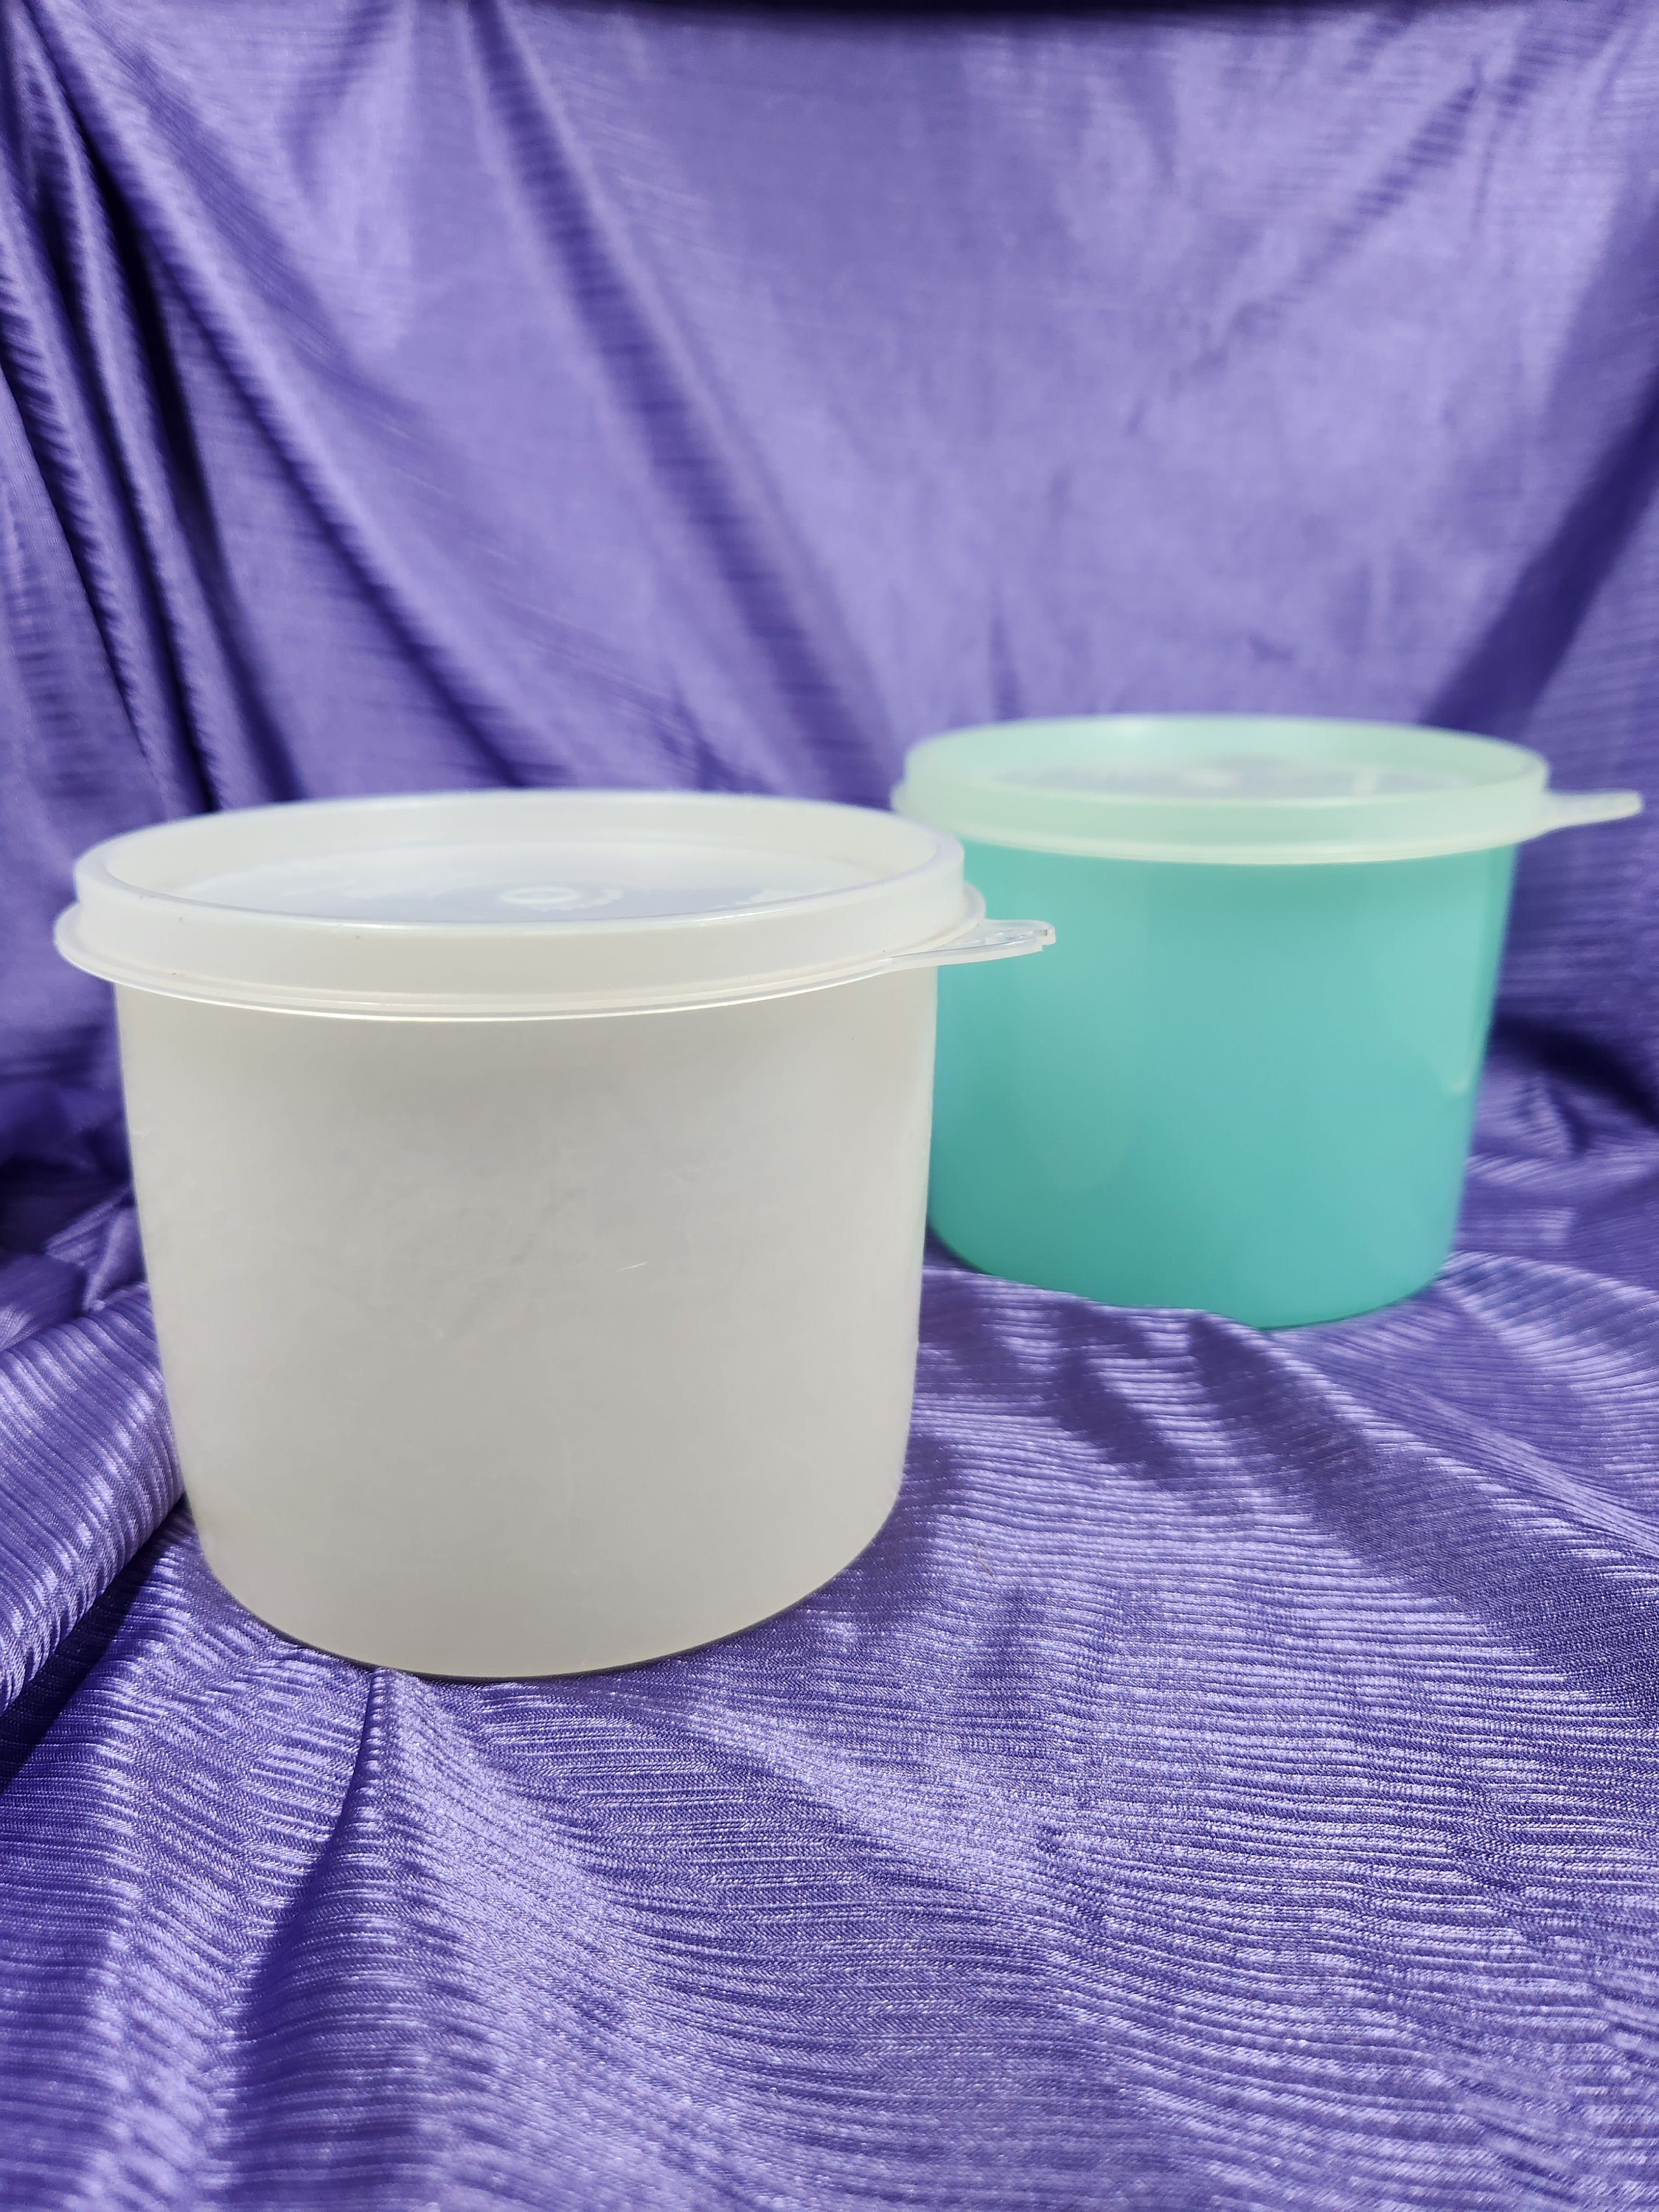 Lot of 3 Vintage Tupperware Harvest Yellow Cake Large Round Containers  w/Lids